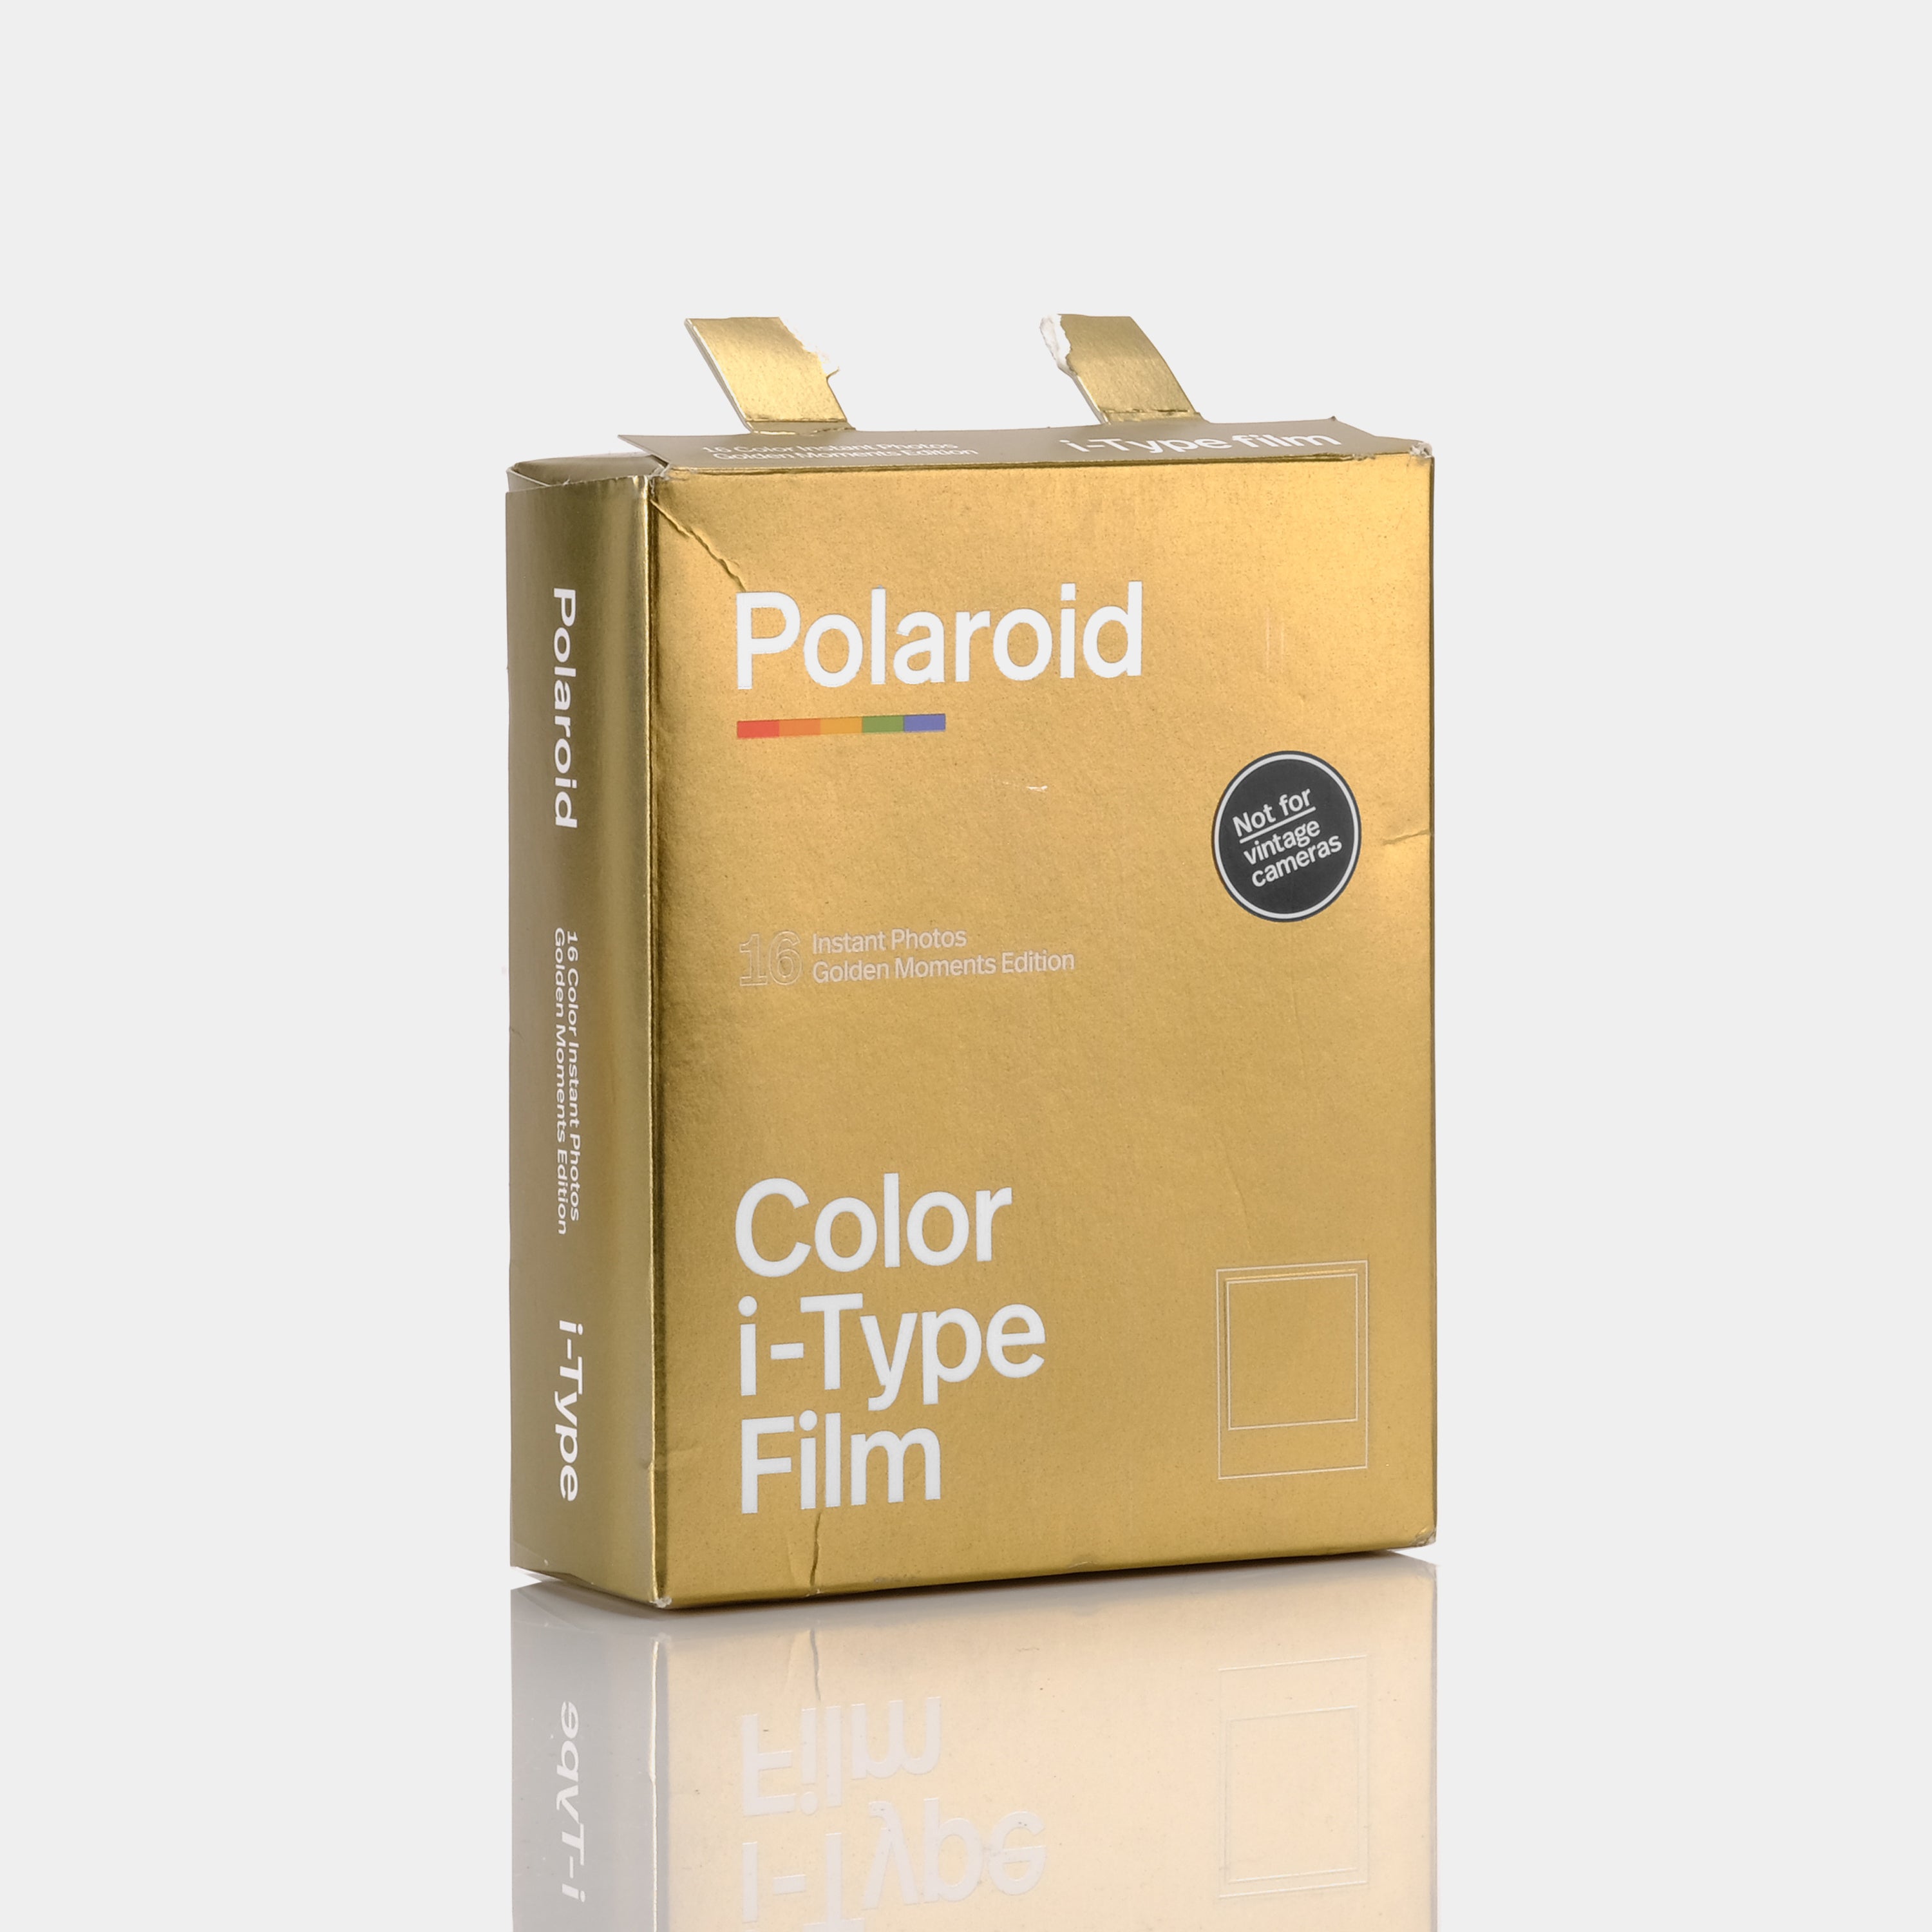 Discounted Polaroid i-Type Gold Moments Edition Color Instant Film (2 Pack)